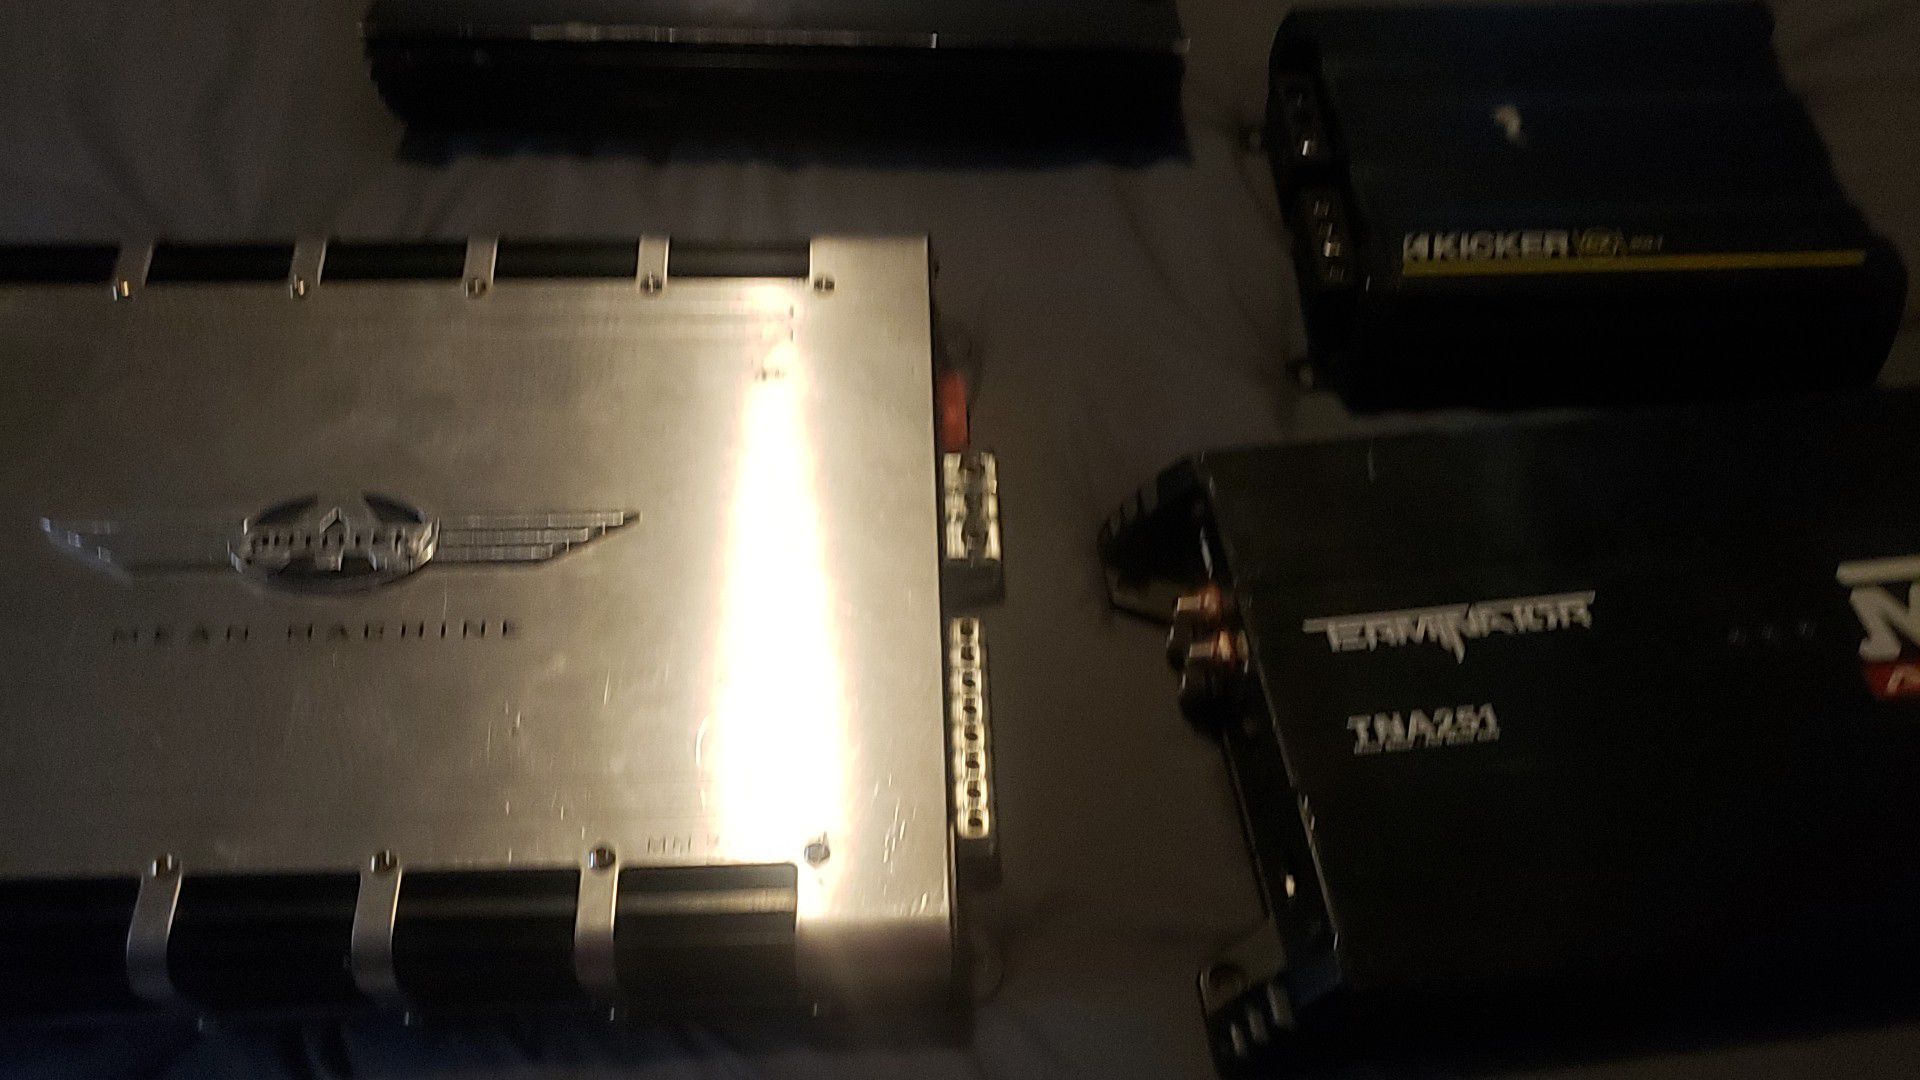 Car amplifiers MTX, JVC and more